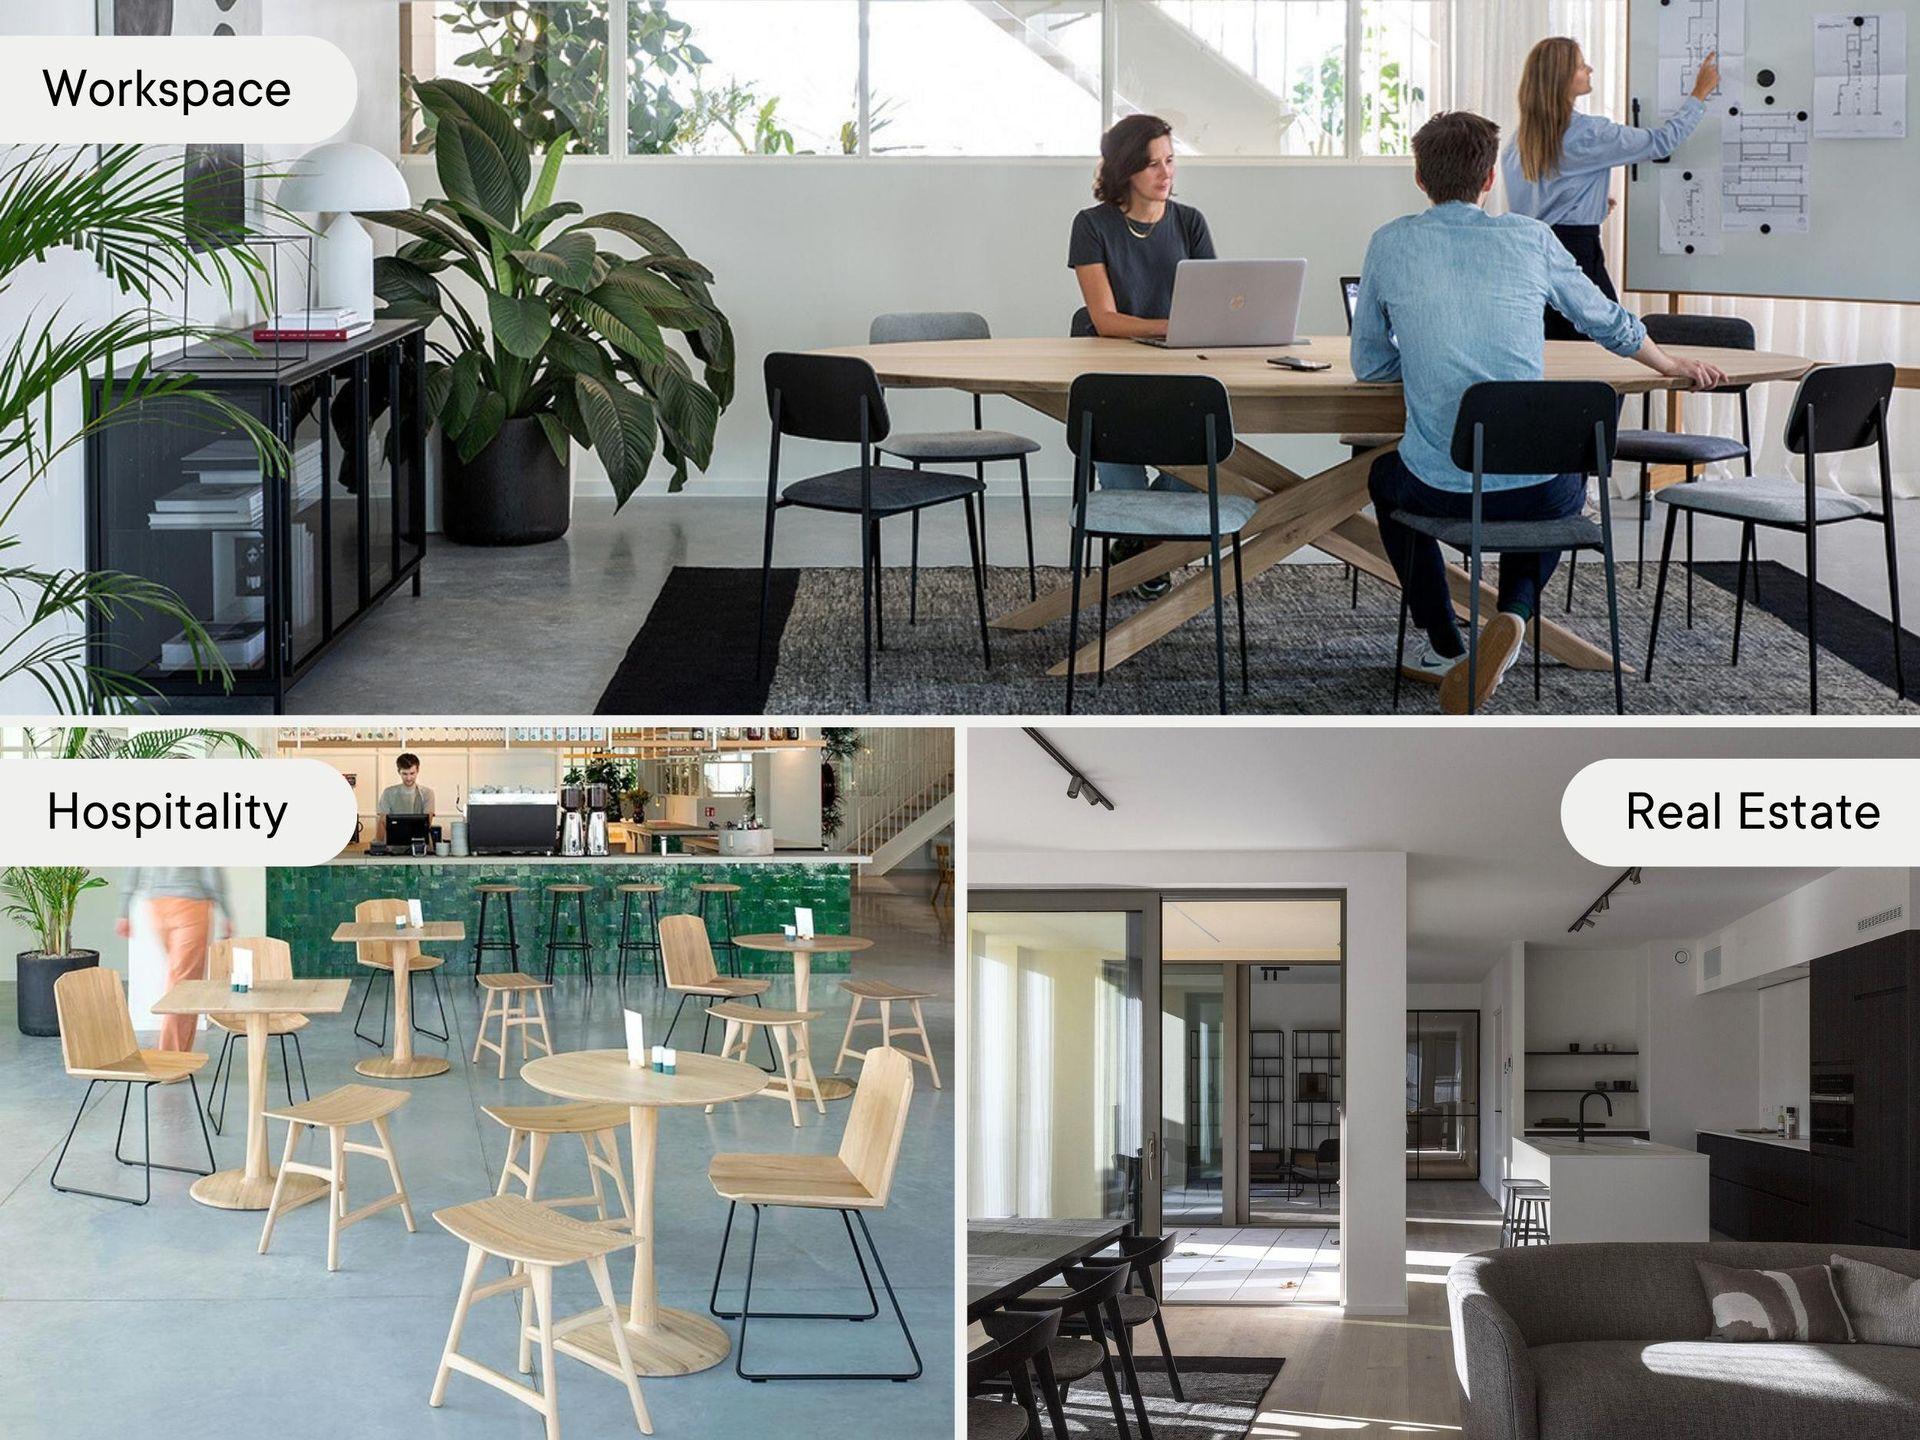 Live Light | Rent furniture for workspaces, hospitality, real estate, events and more